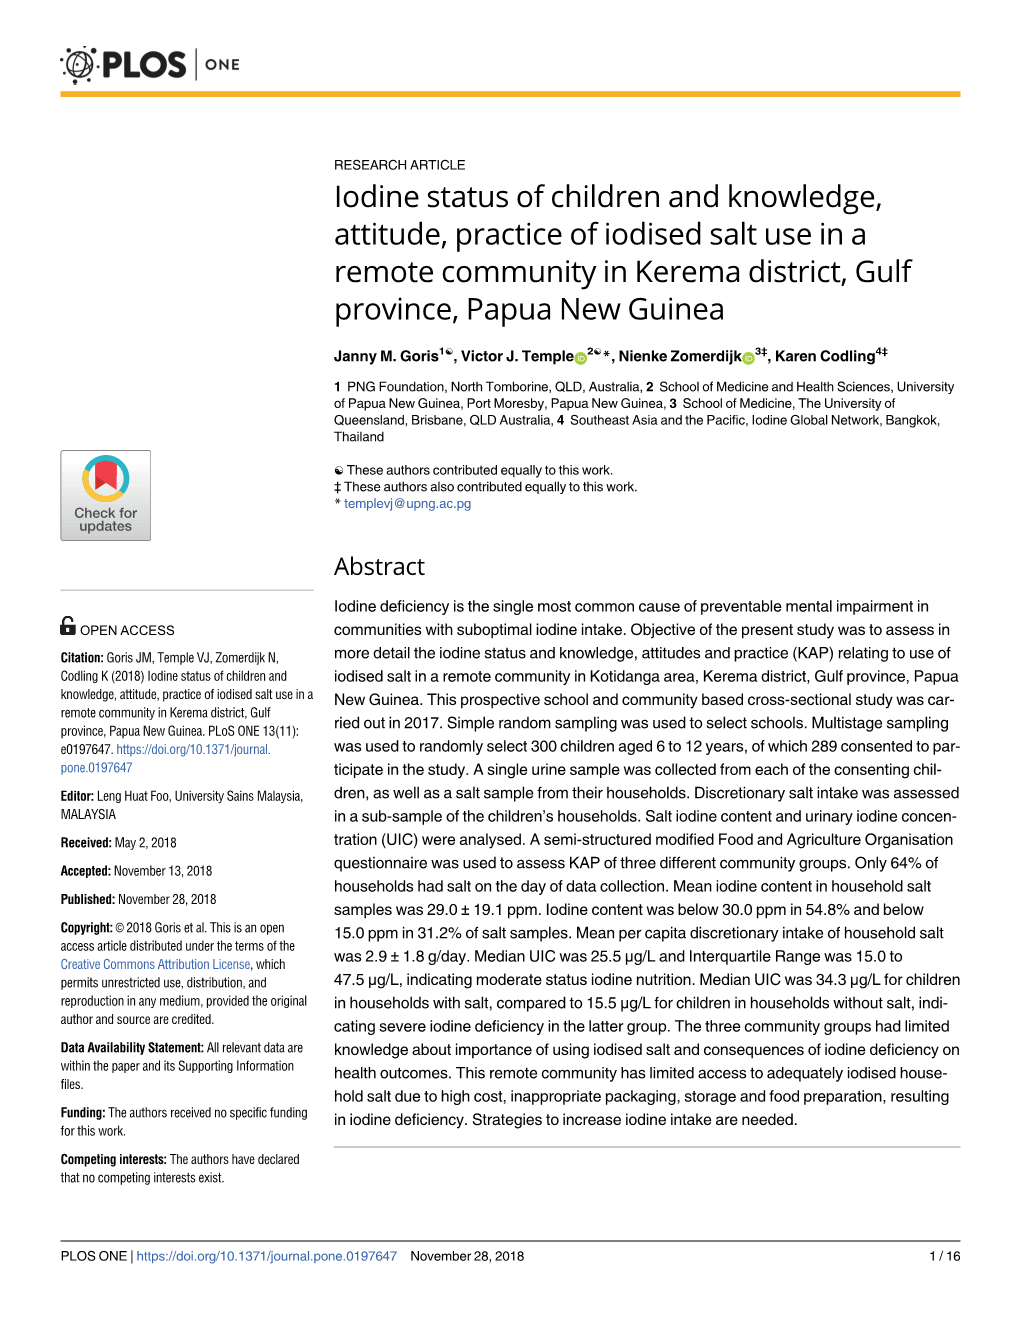 Iodine Status of Children and Knowledge, Attitude, Practice of Iodised Salt Use in a Remote Community in Kerema District, Gulf Province, Papua New Guinea